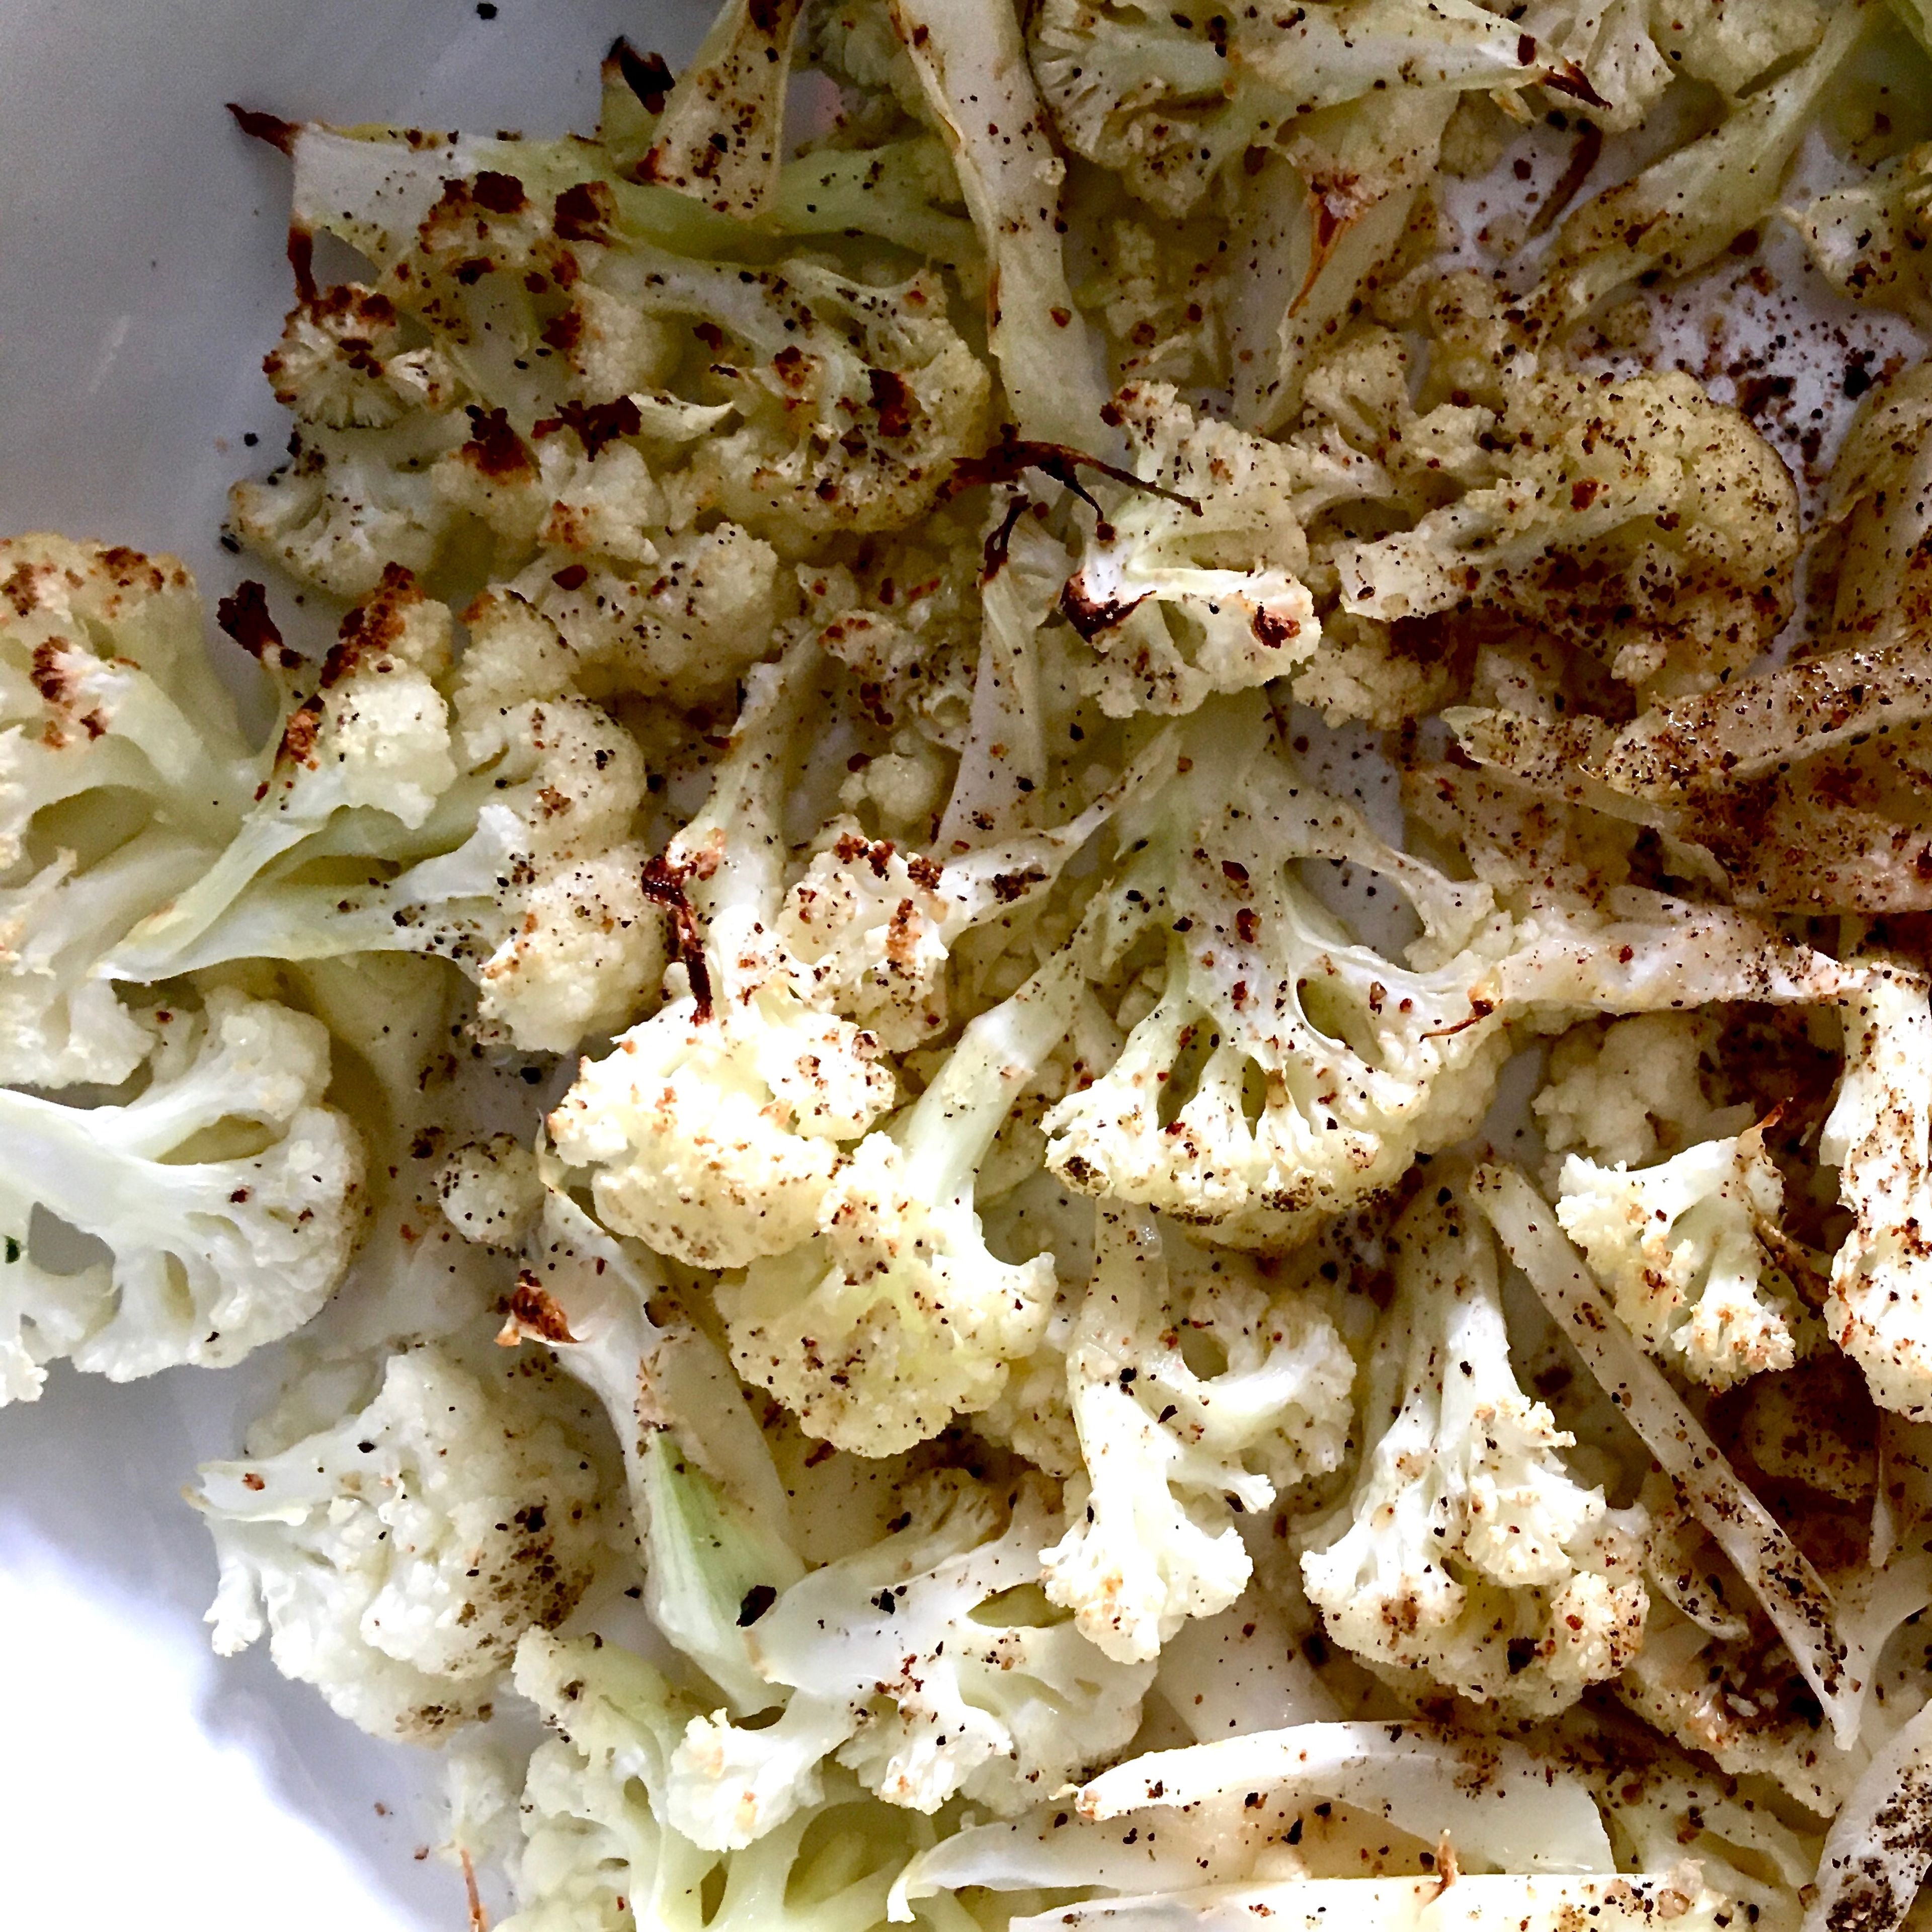 Place cauliflower pieces in an oven-safe dish. Season with half of freshly grated nutmeg, salt and pepper. Drizzle with olive oil and place in the oven until charred. Add in hazelnuts and place back in the oven for some more minutes, until the nuts get a good roast.